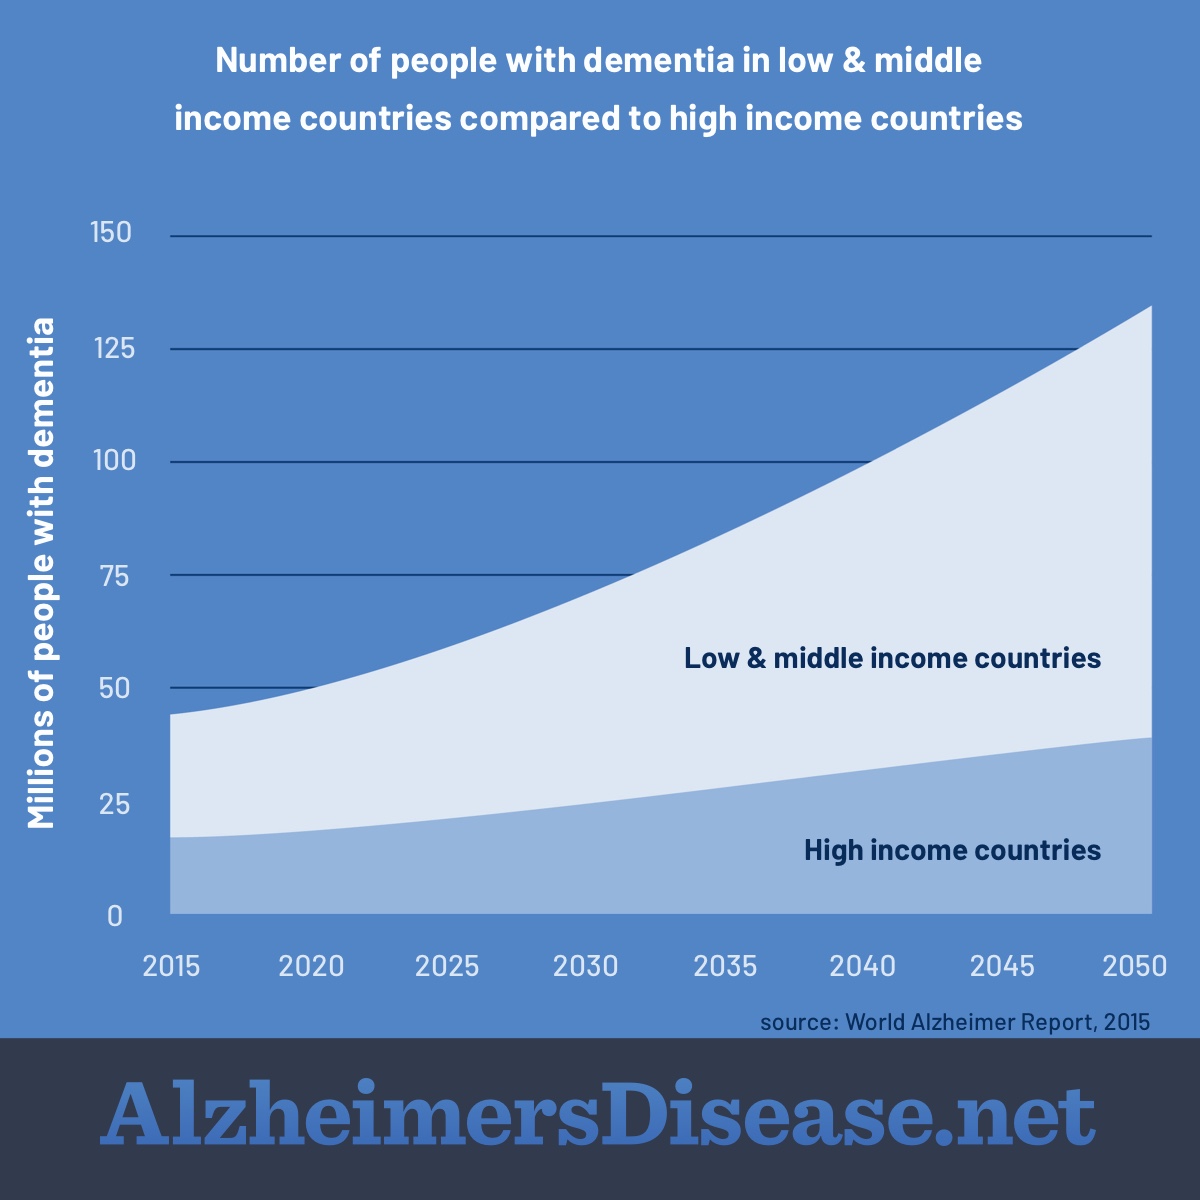 number of people with dementia in low & middle income countries is higher and rising quicker compared to high income countries from 2015 to 2050